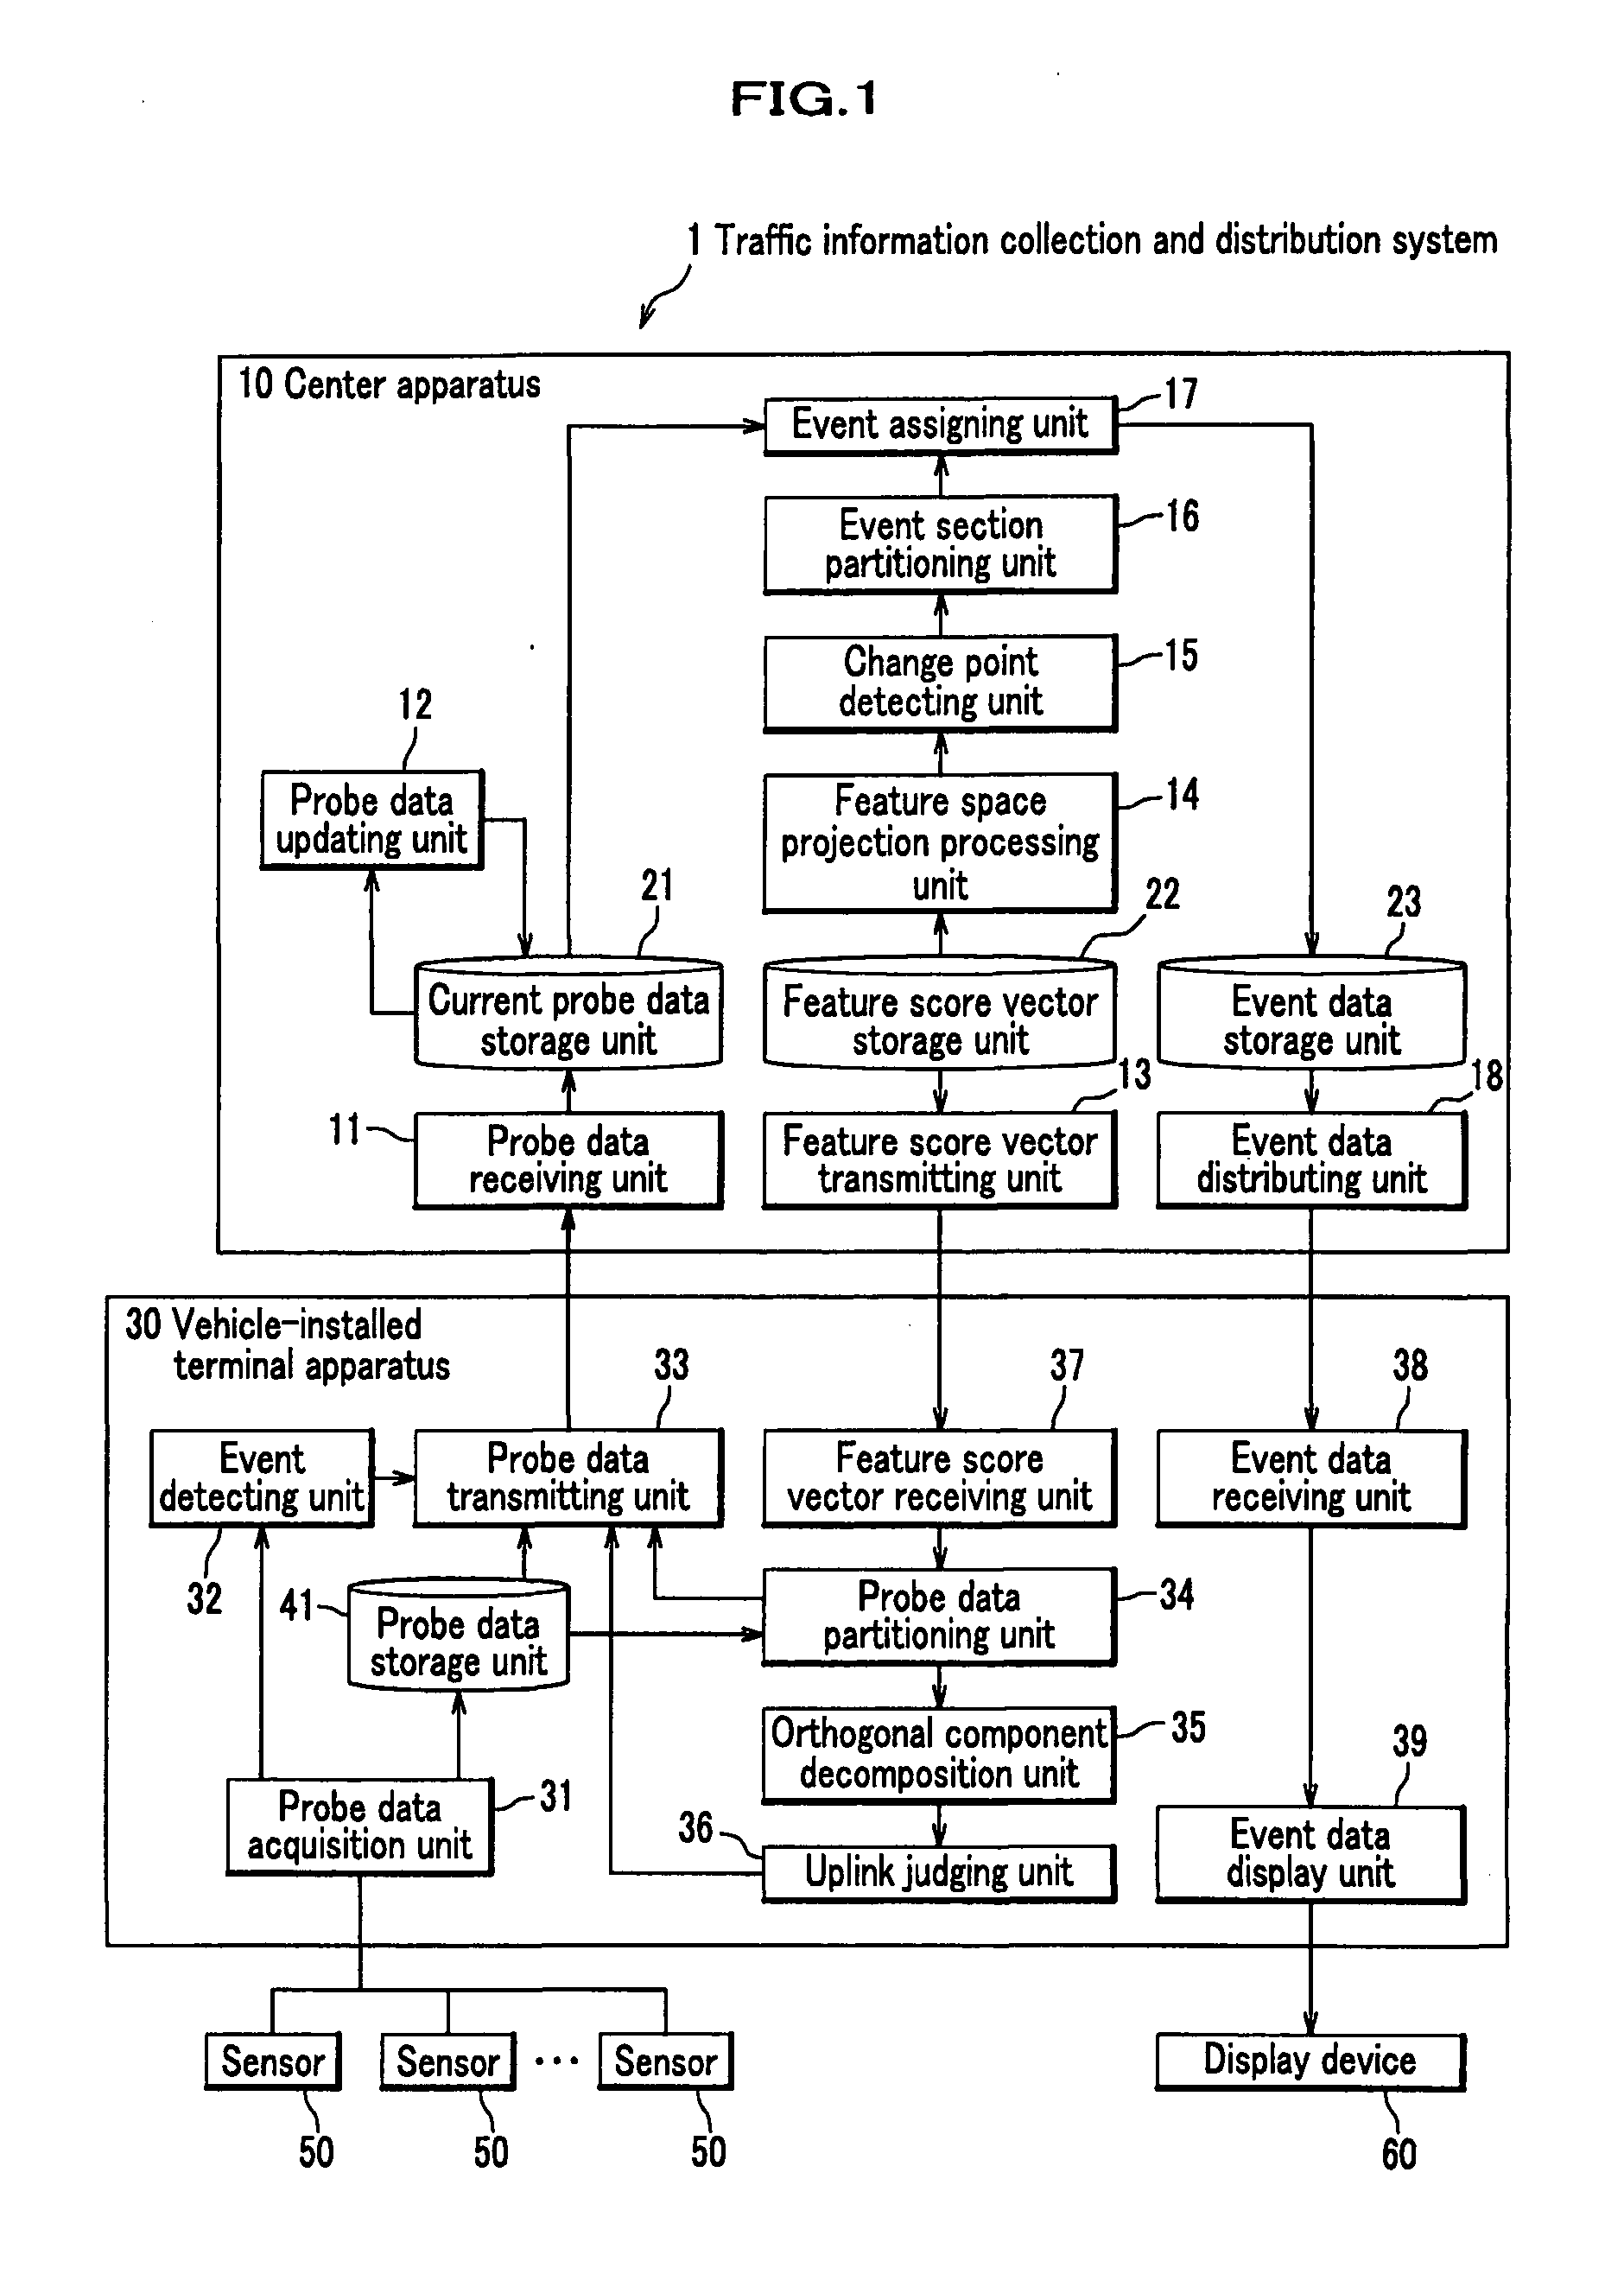 System and Method for Collecting and Distributing Traffic Information